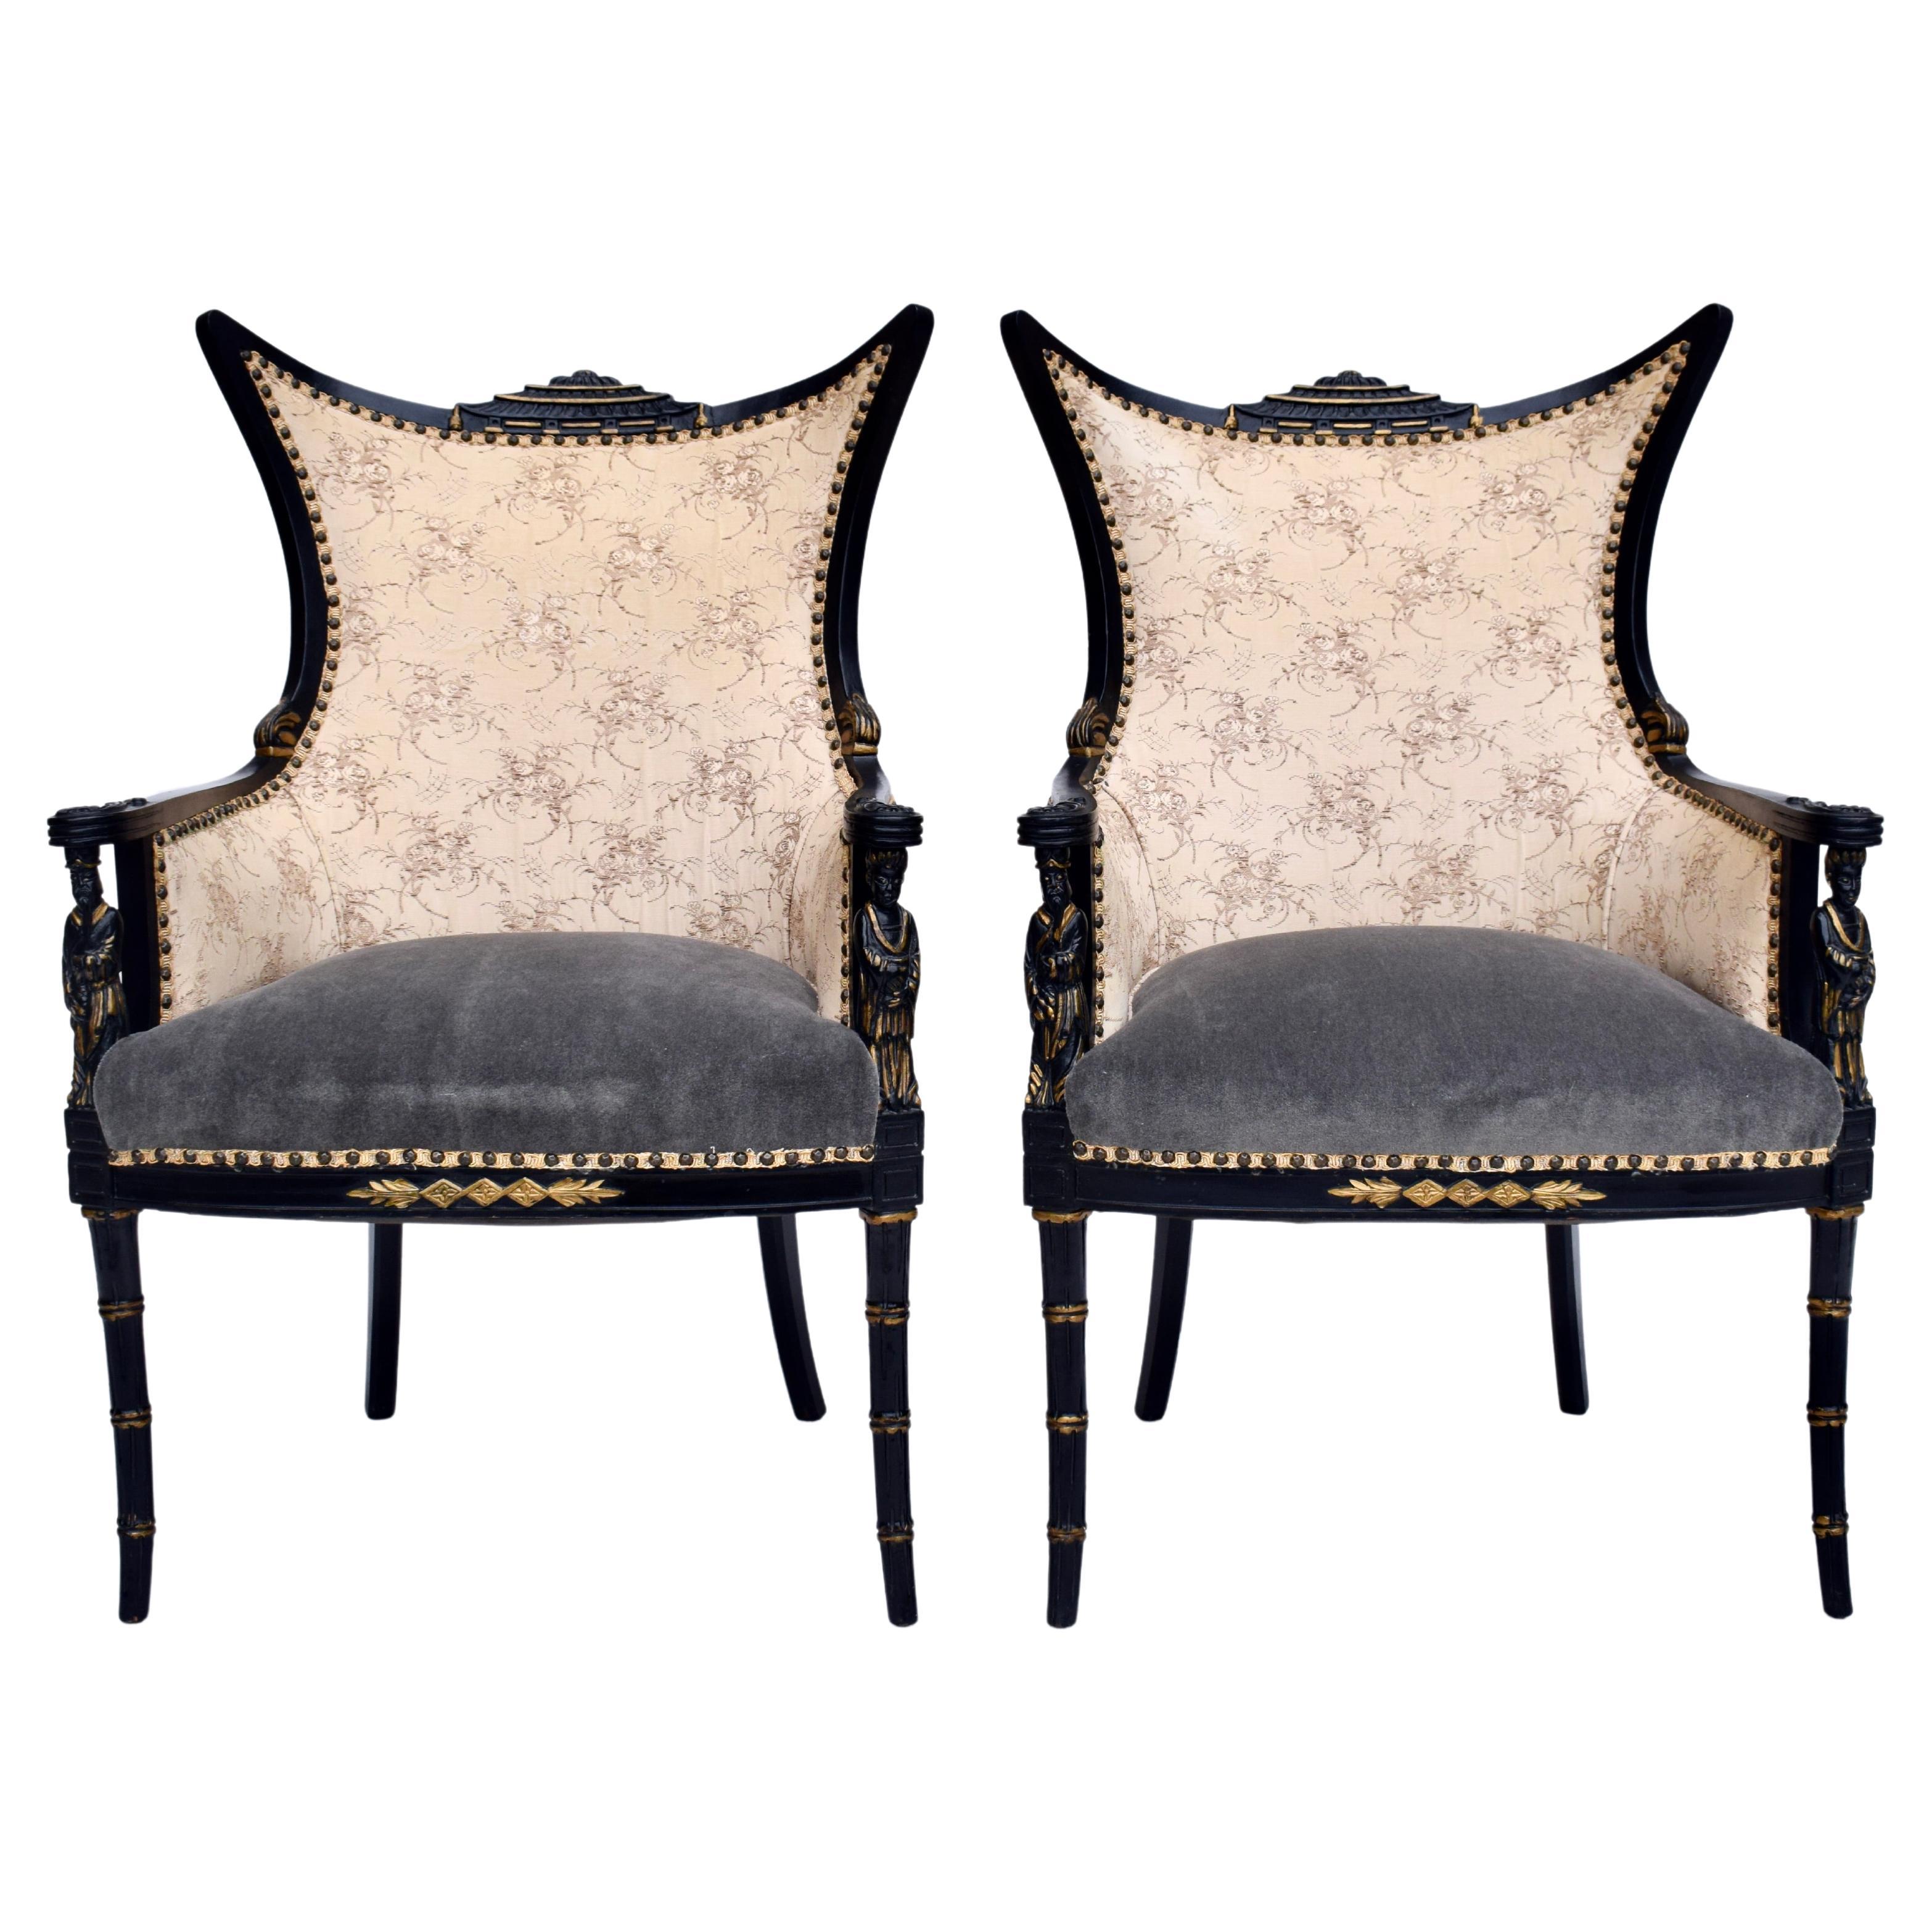 Vintage Chinoiserie Pagoda Arm Chairs For Sale at 1stDibs